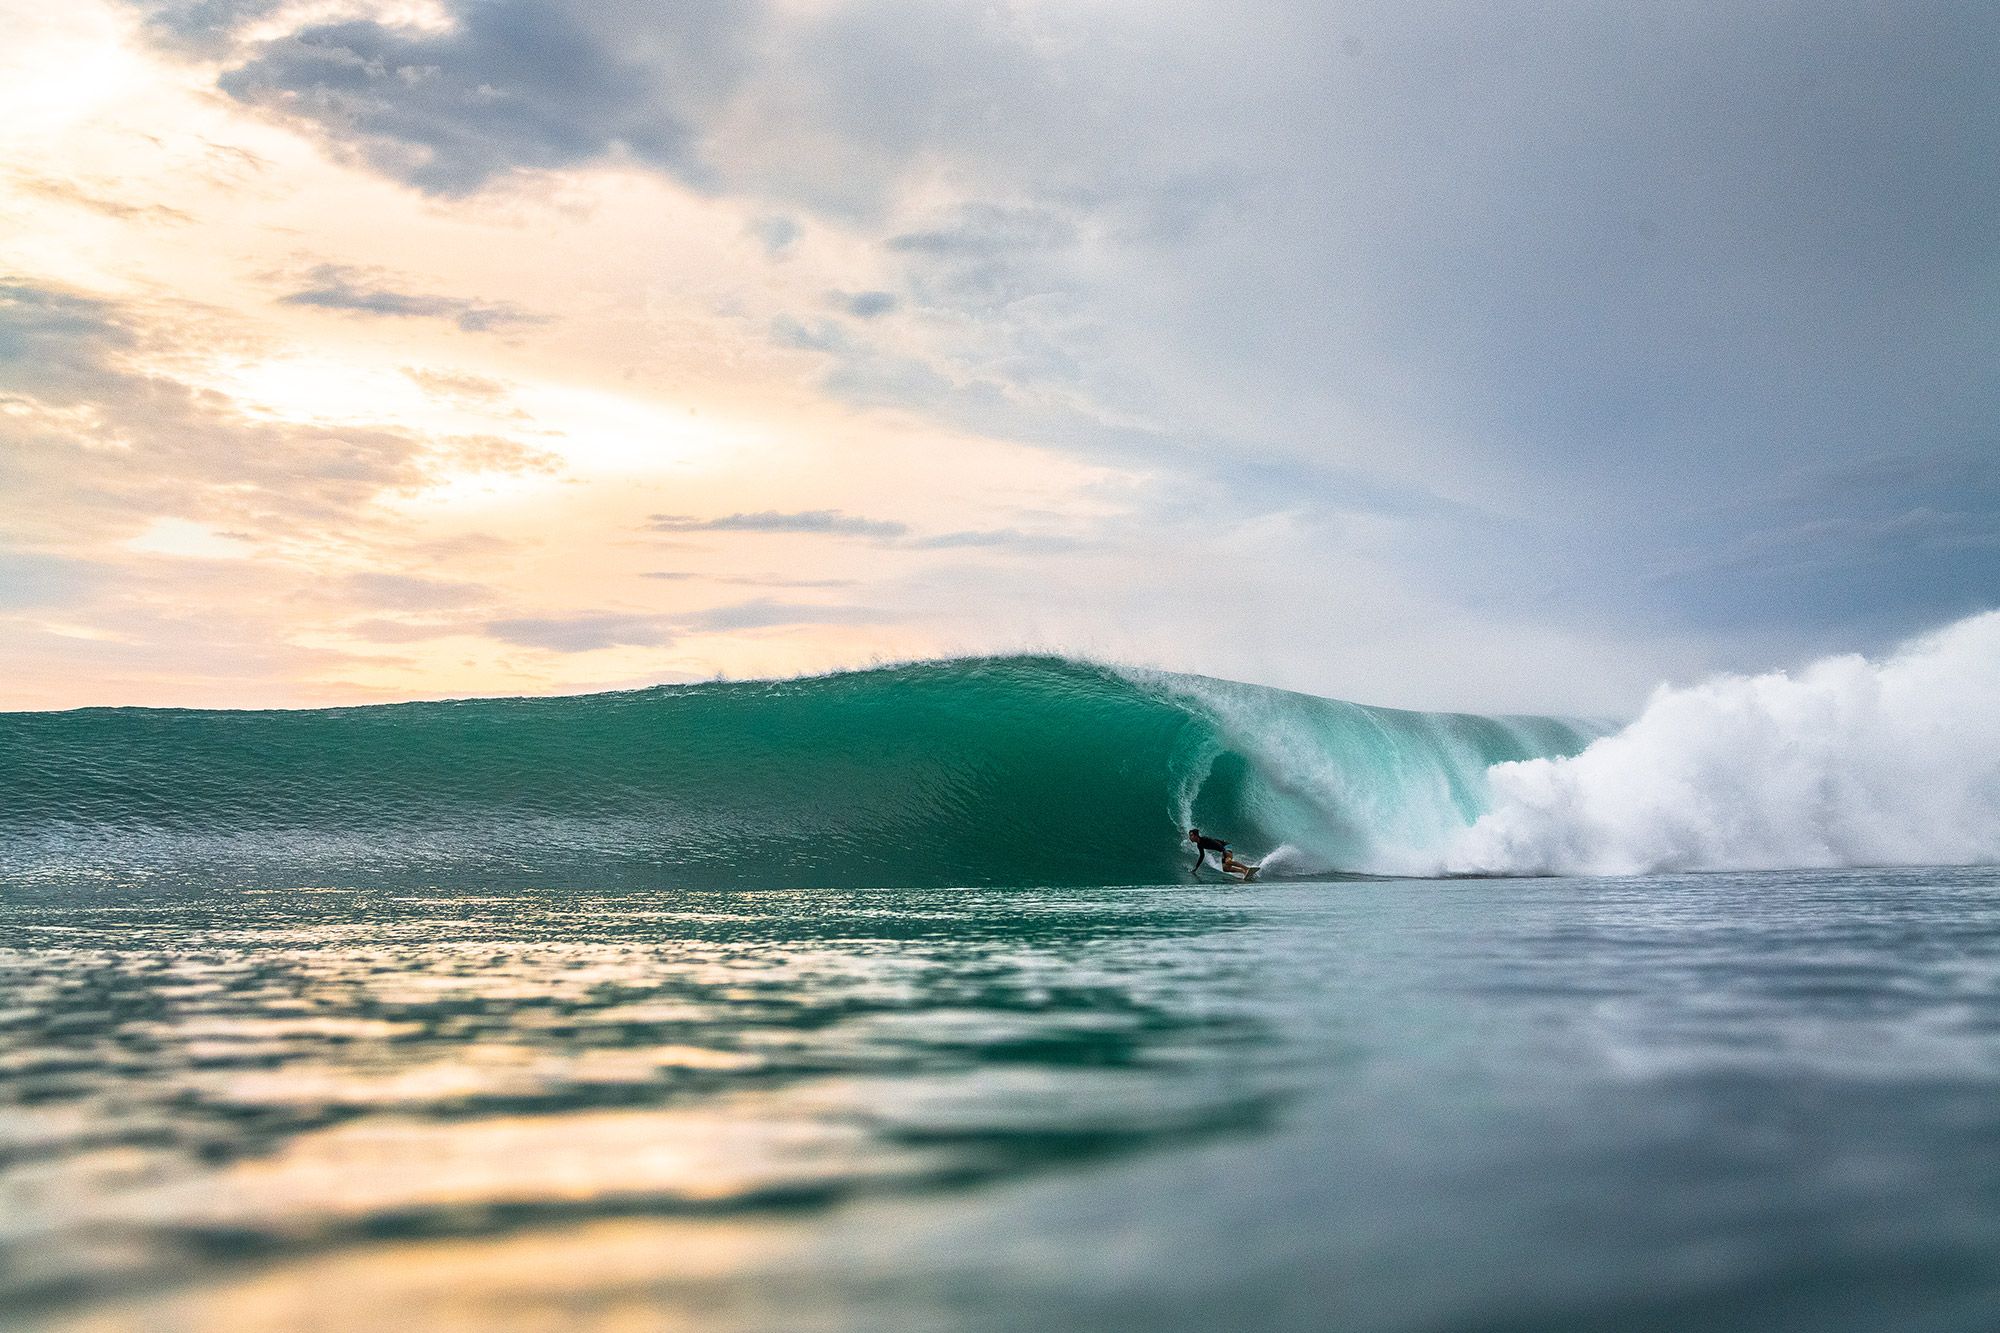 Rusty Long in Mexico, one of the world's most consistent surf destinations